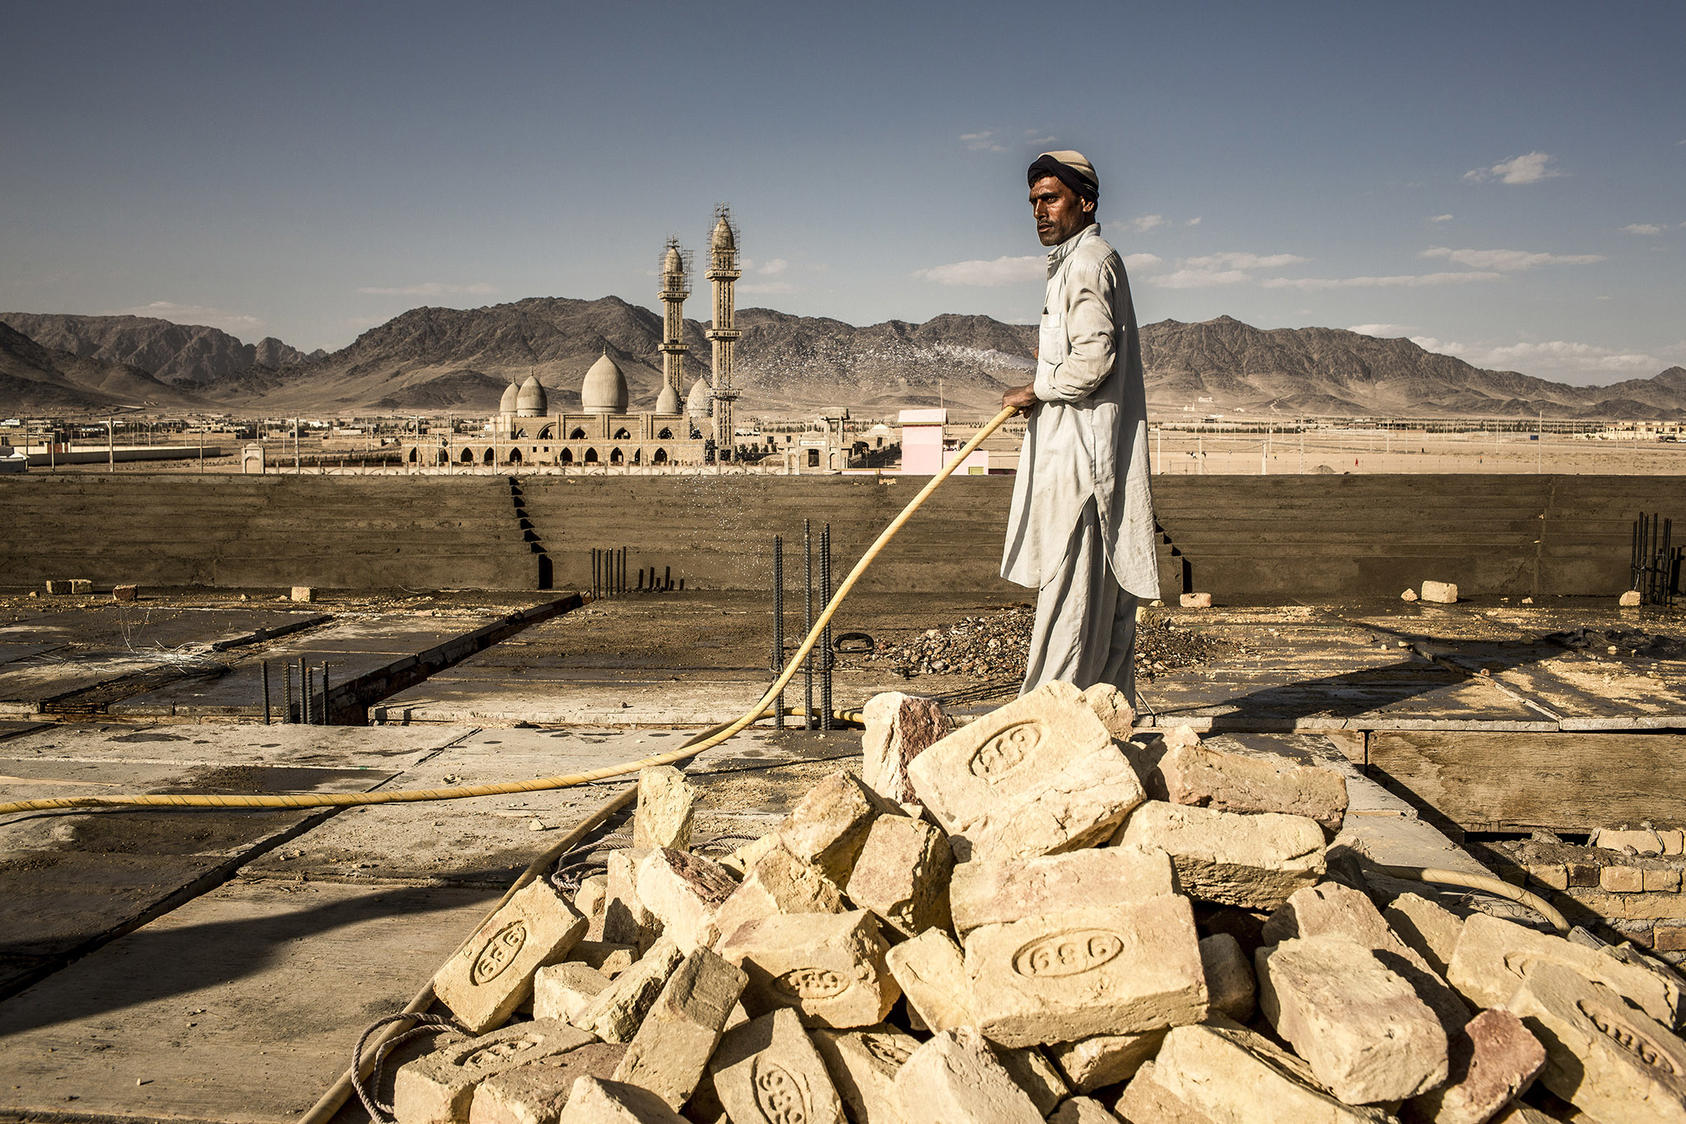 A laborer works on the roof of a large villa under construction in Kandahar, Afghanistan. (Bryan Denton/New York Times)